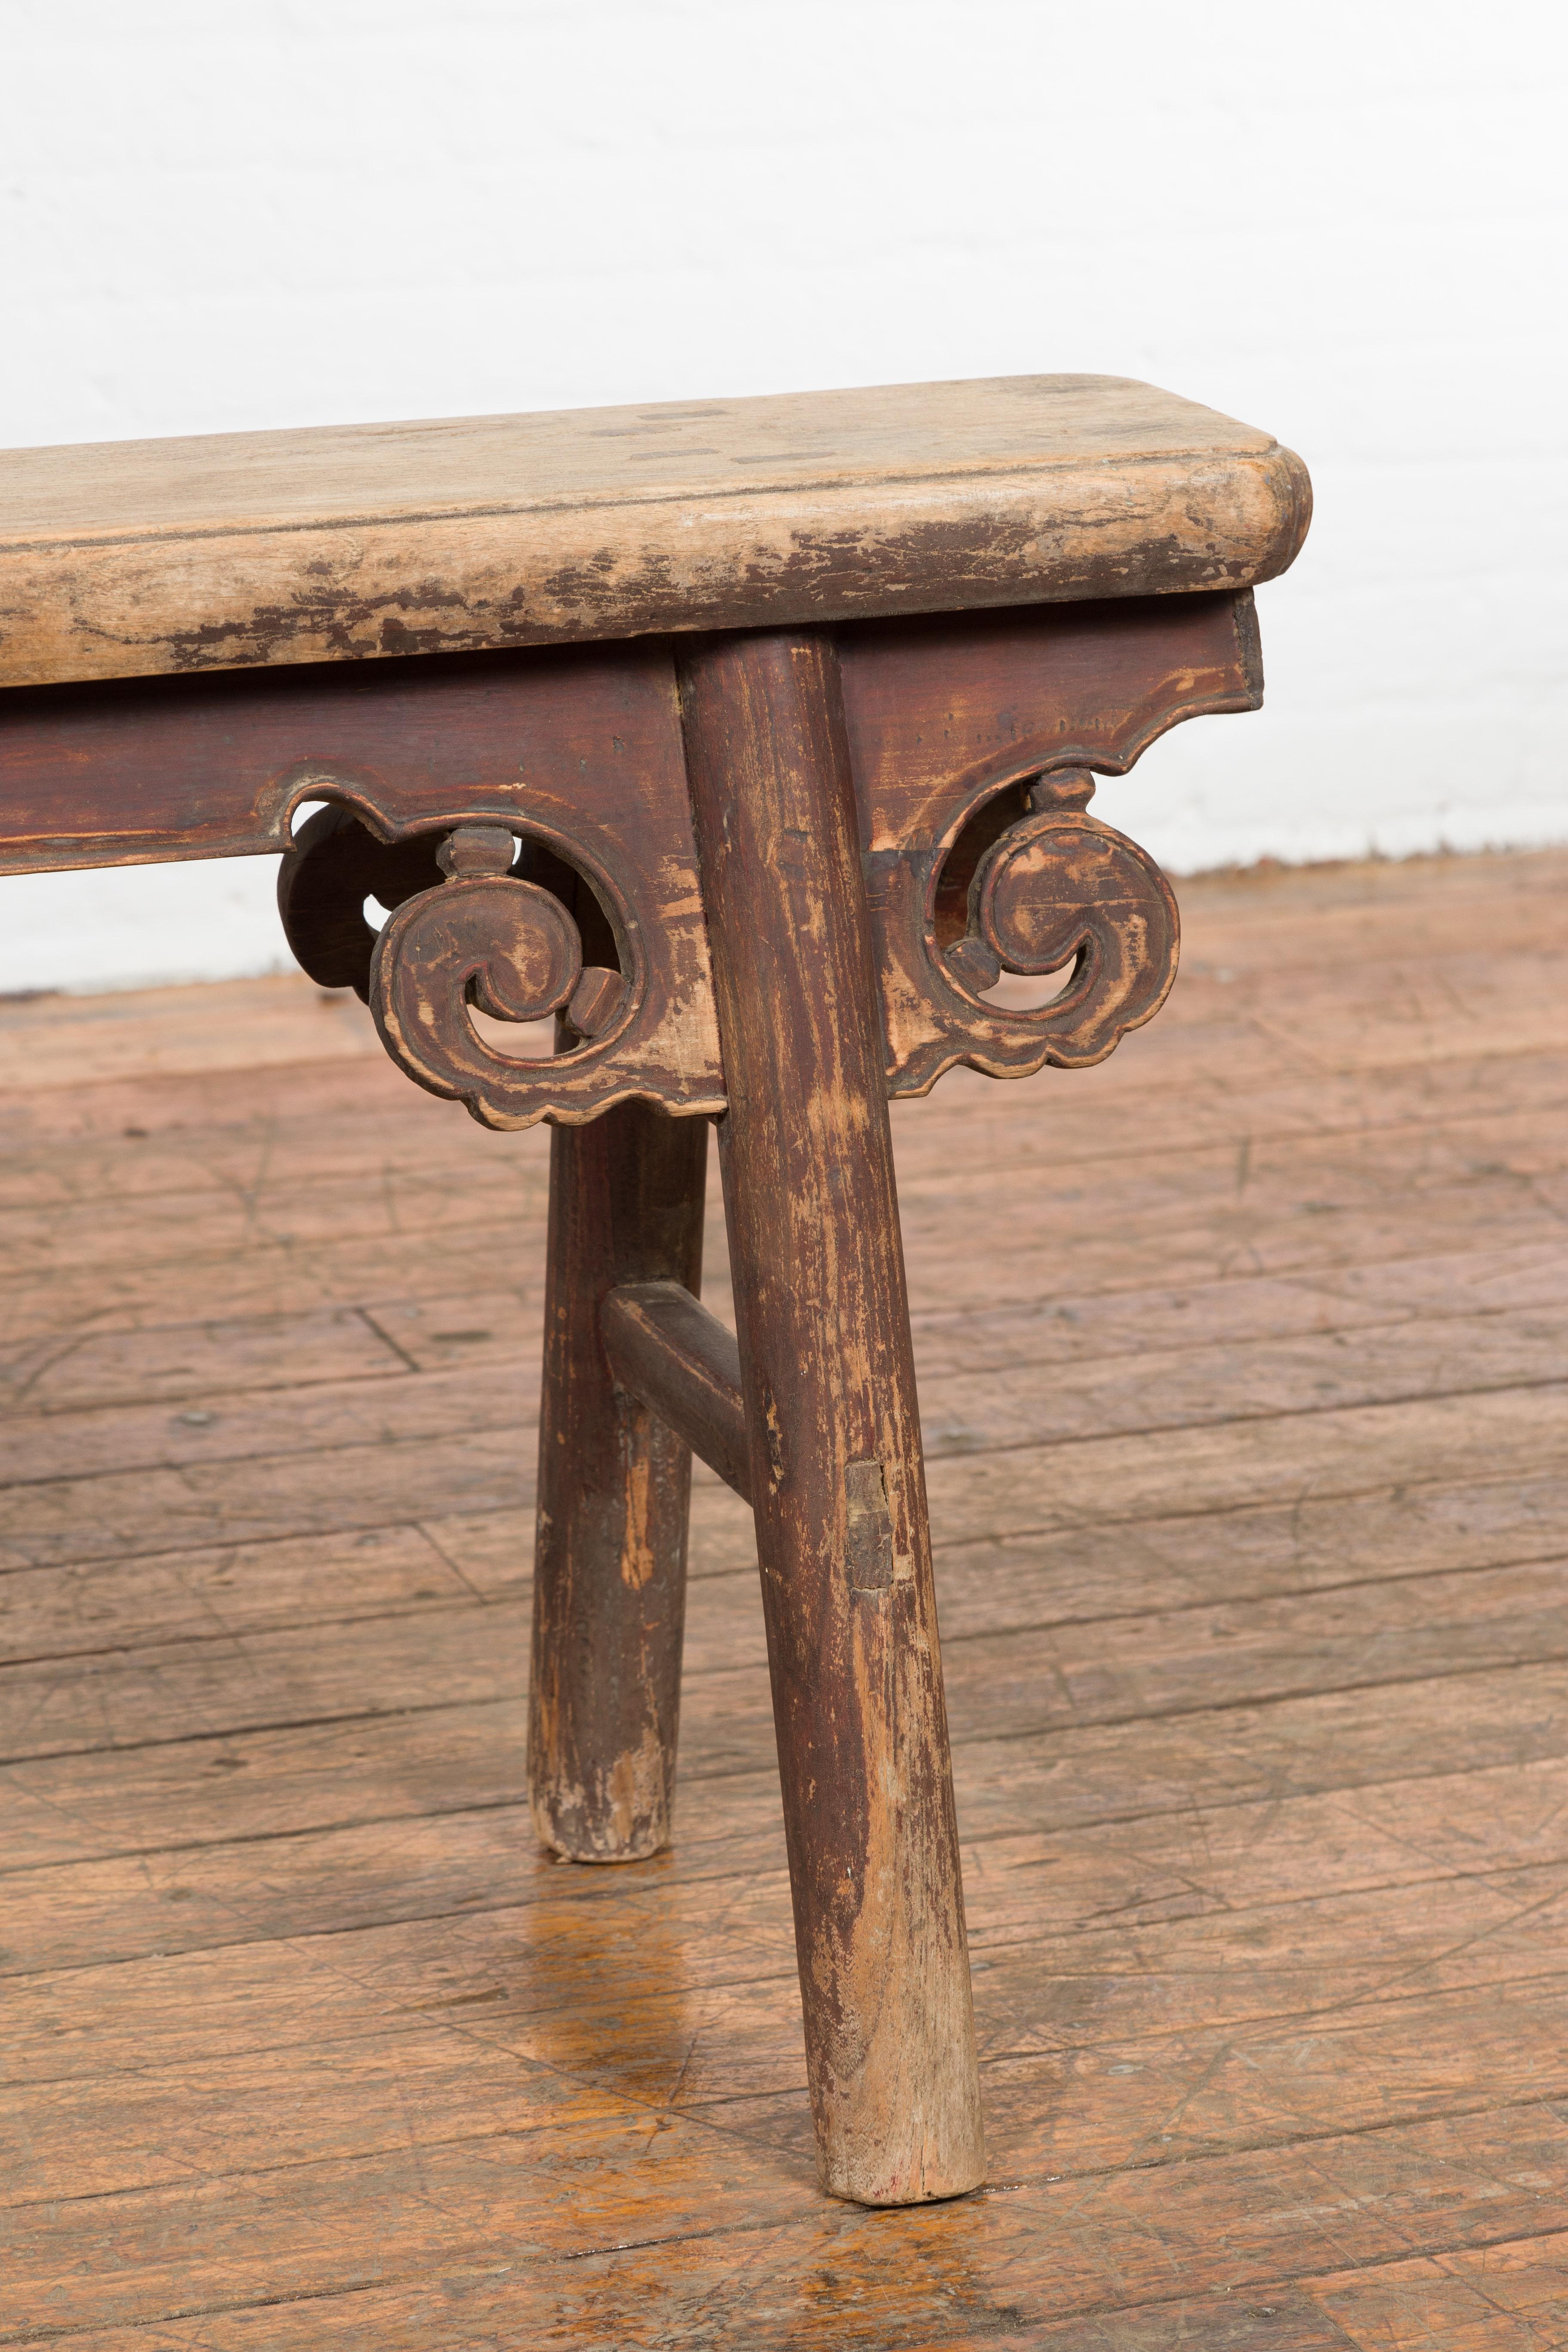 Wood Rustic Chinese A-Frame Bench with Scrolling Spandrels and Distressed Patina